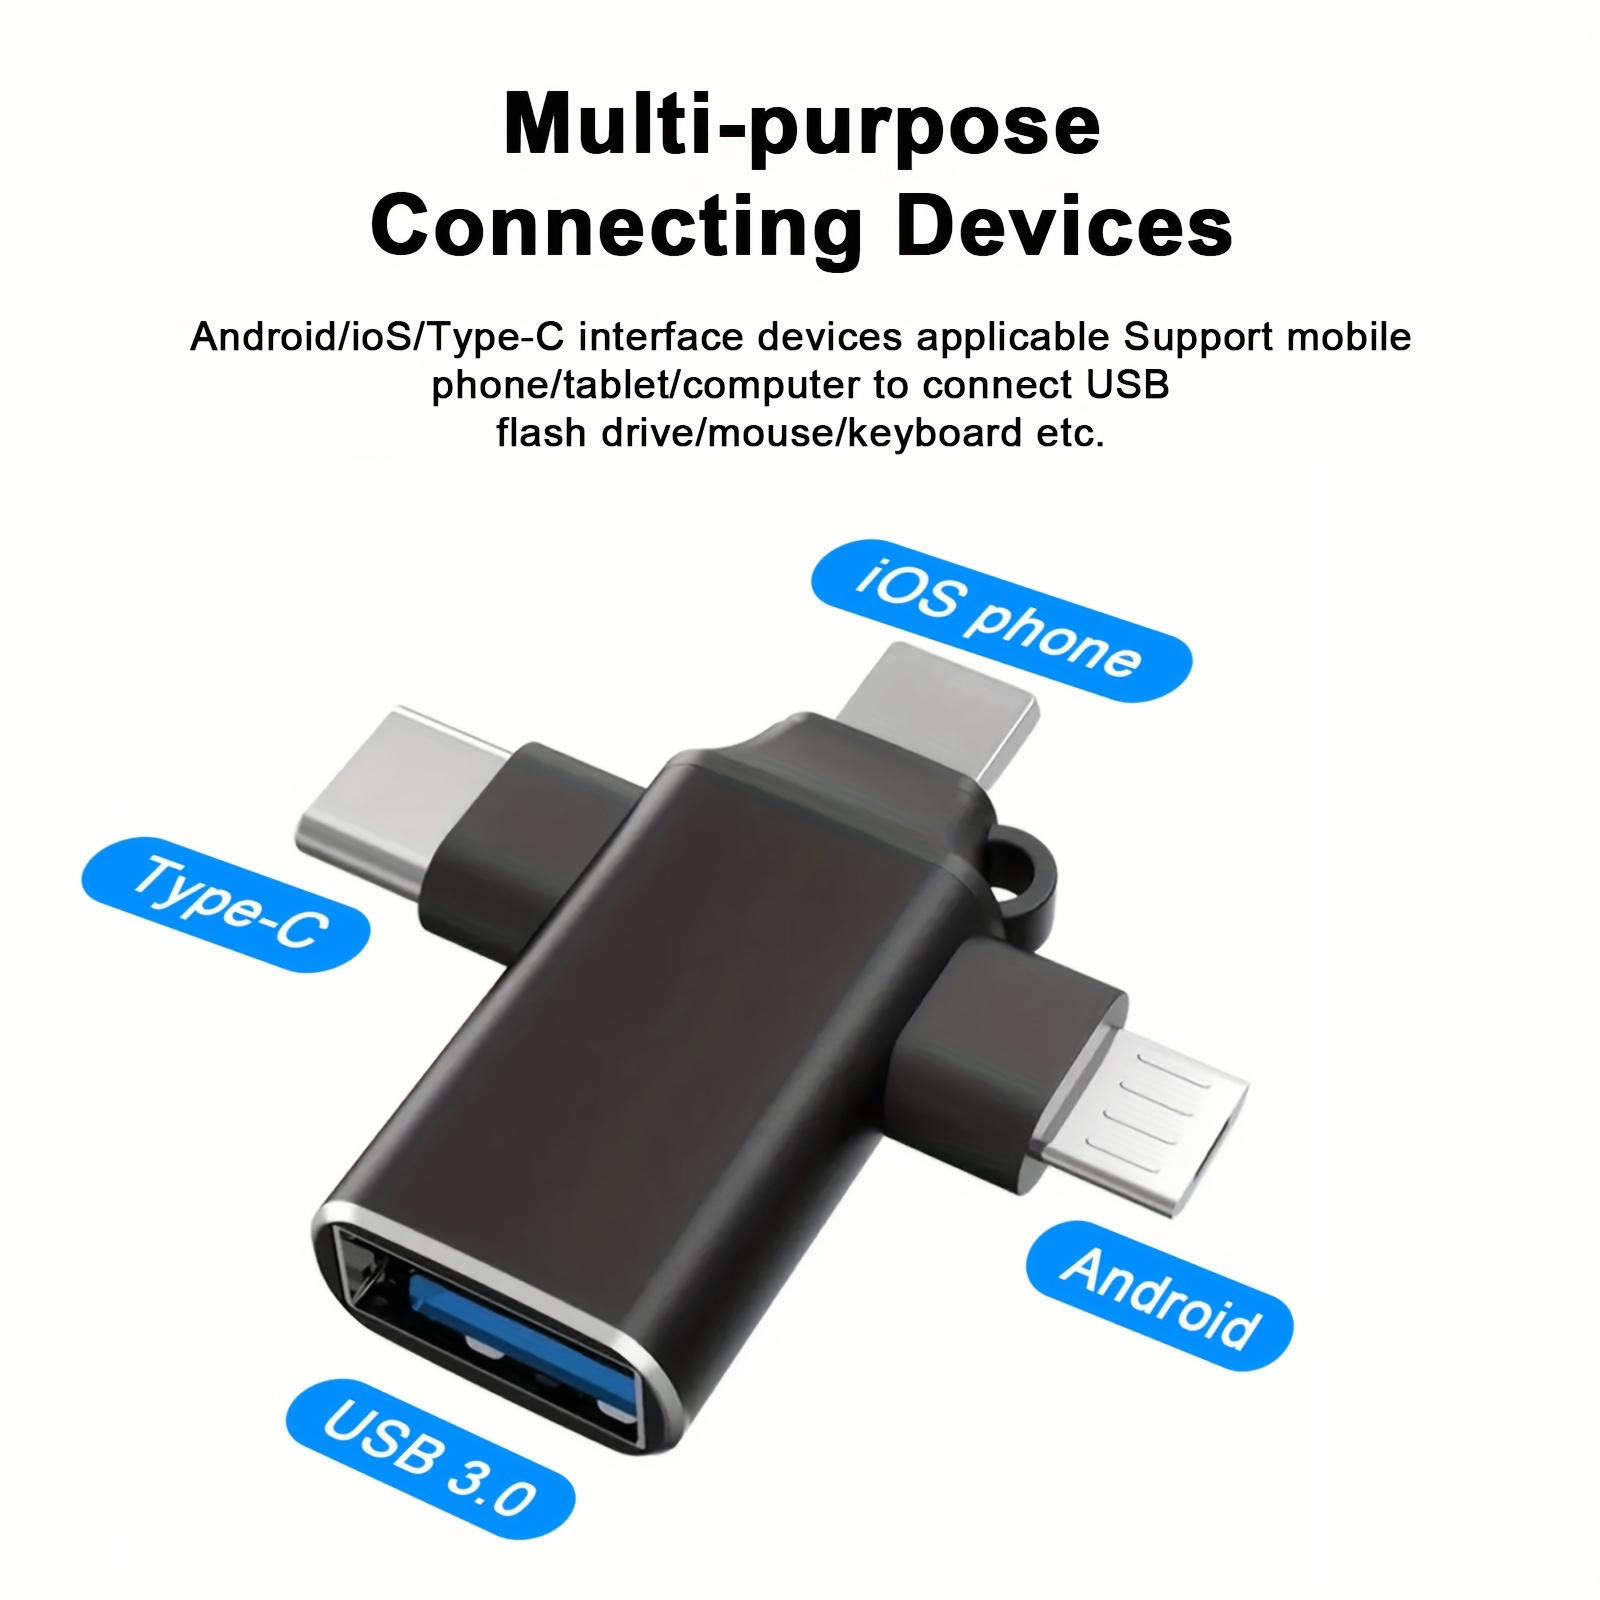 

3-in-1 Otg Adapter With Usb 3.0, Data Transmission Converter For Android/ios, Type-c, Micro Usb & Usb-a Compatible, Multi-purpose Mobile Accessory, Compact Design